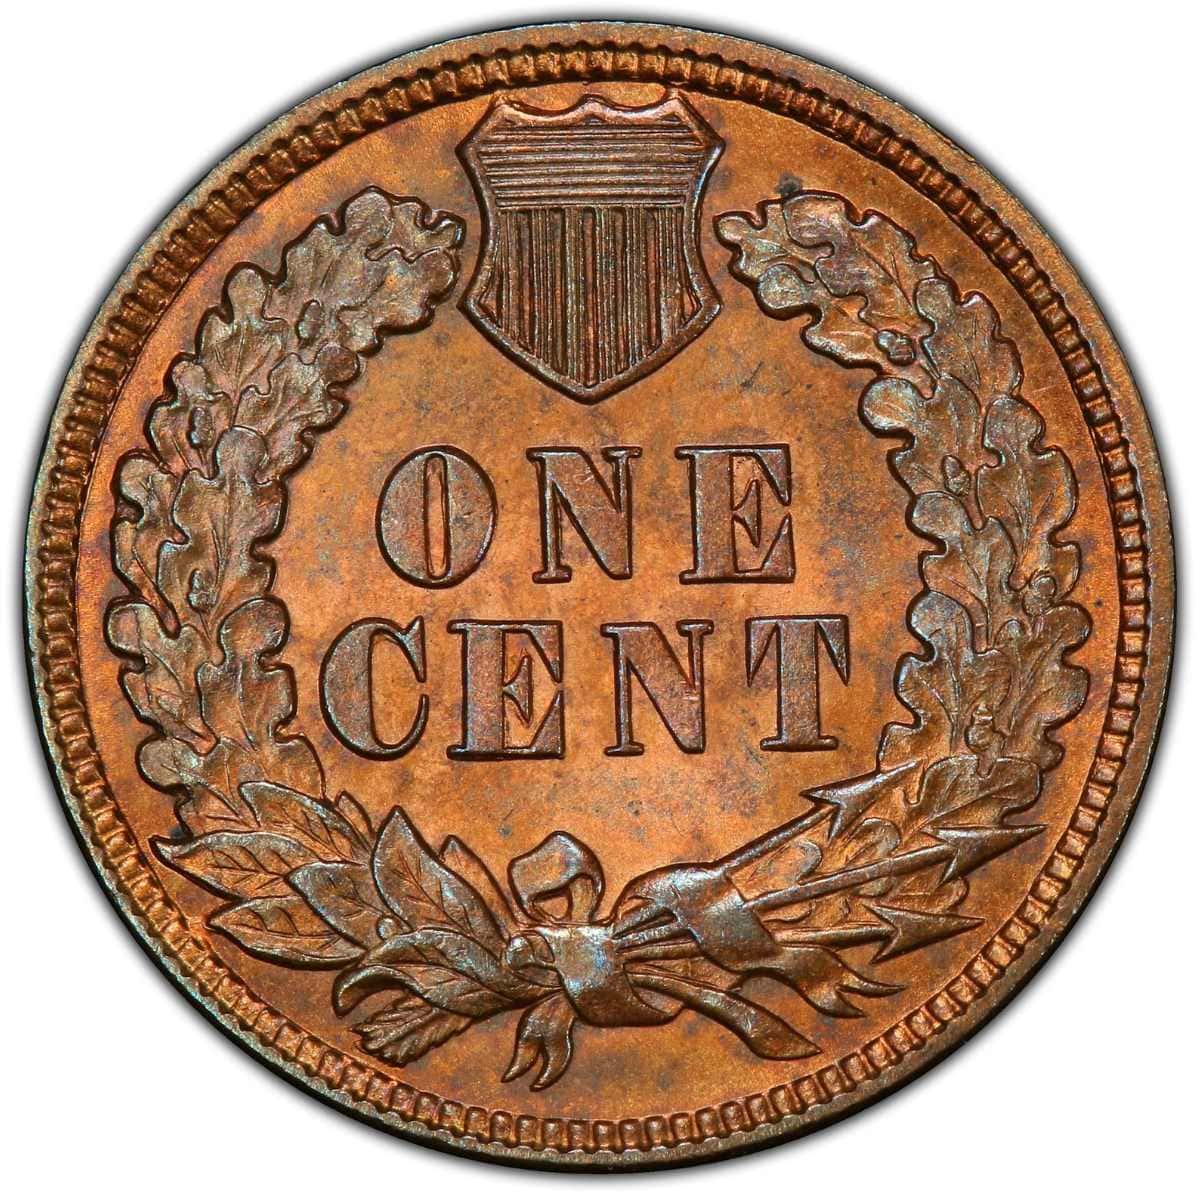 1888 Indian Head Penny reverse feature